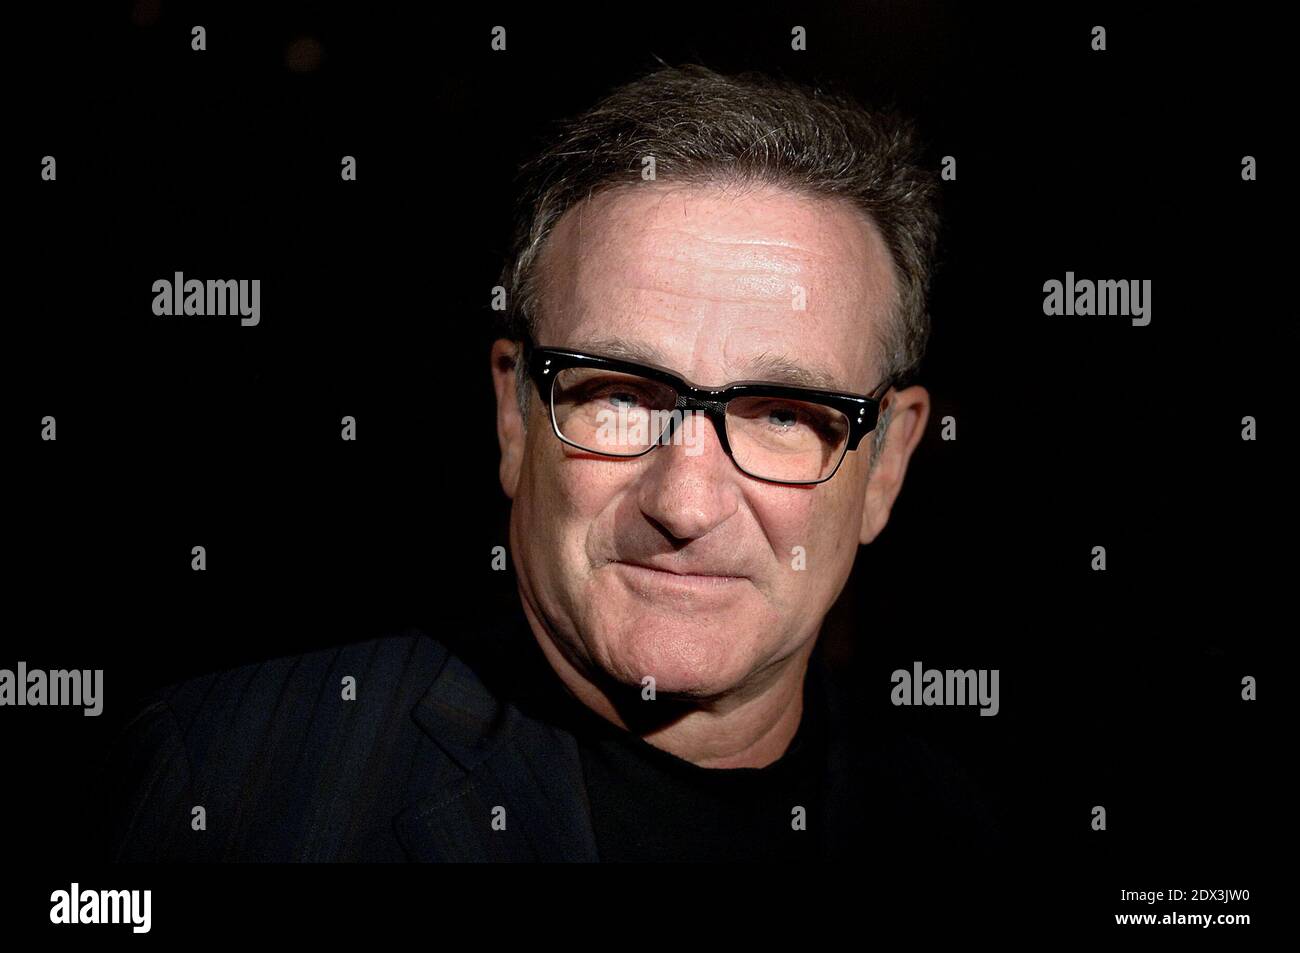 US actor Robin Williams has been found dead, aged 63, in an apparent suicide, California police say Monday August 11, 2014. Marin County Police said he was pronounced dead at his home shortly after officials responded to an emergency call around noon local time. Williams was famous for films such as Good Morning Vietnam and Dead Poets Society and won an Oscar for his role in Good Will Hunting; File photo : Robin Williams attends the Kennedy Center awards 2007 Mark Twain Prize for American Humor to honor actor and comedian Billy Crystal in Washington, DC, USA on October 11, 2007. Photo by Olivi Stock Photo